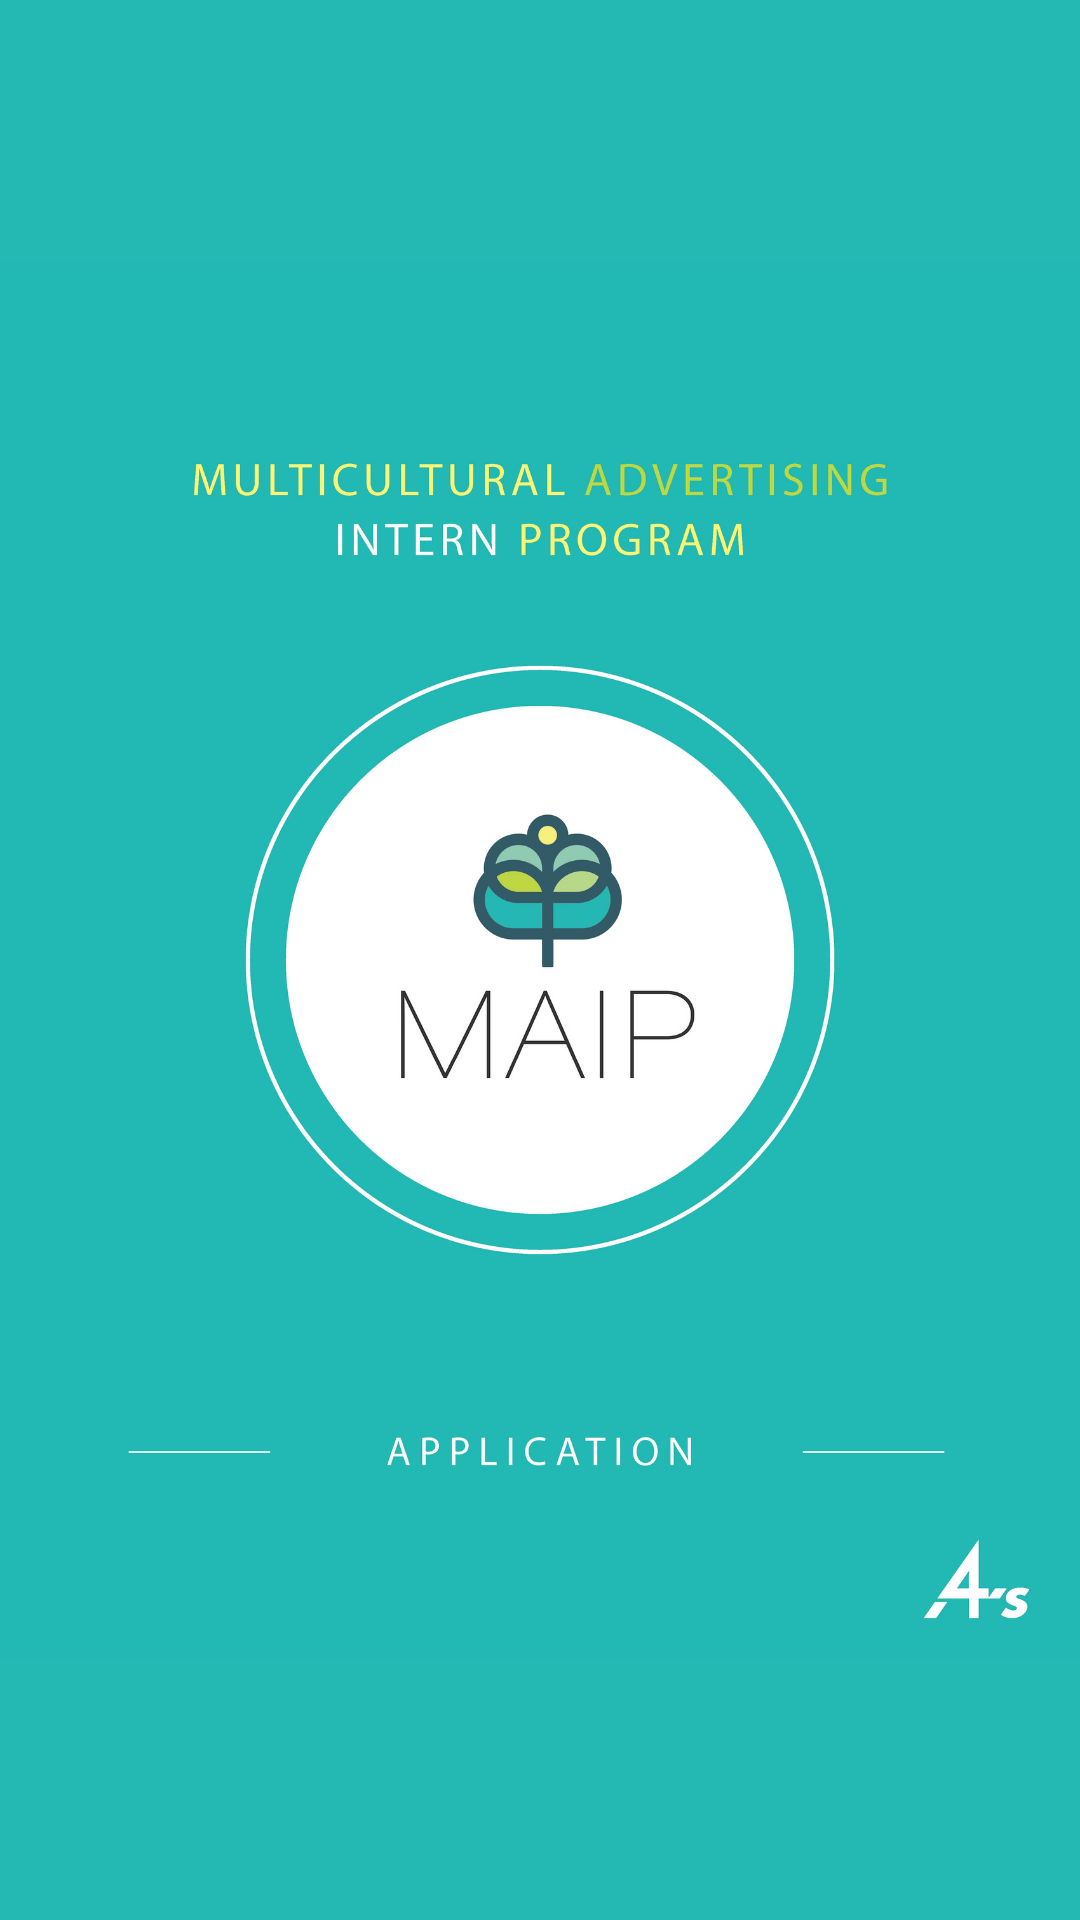 Apply for the Multicultural Advertising Intern Program (MAIP)